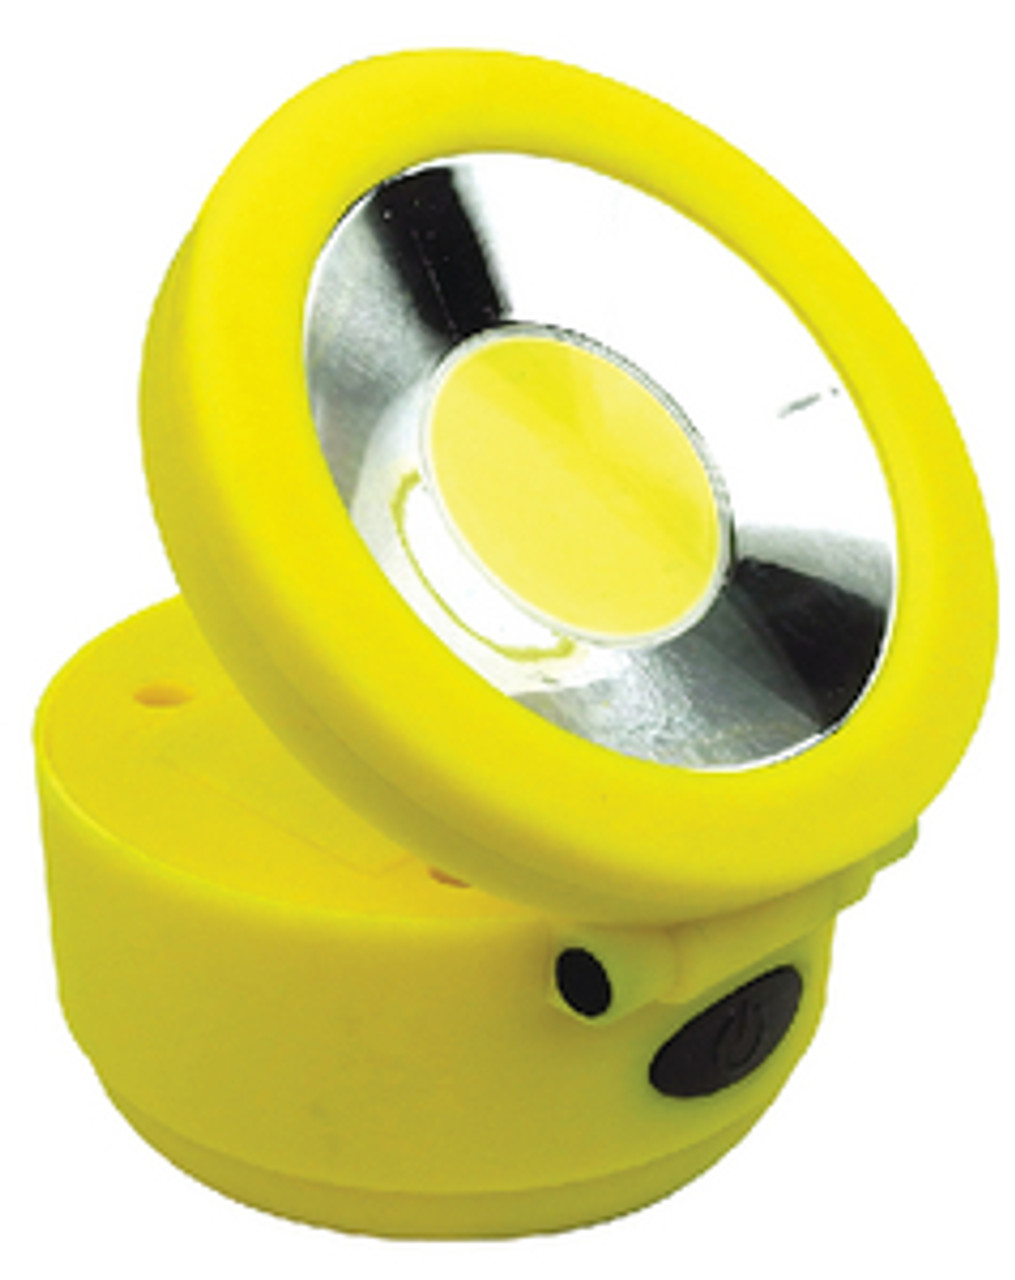 LED Magnetic C.O.B Round Work Light - Keep One on Your Boat for Emergencies